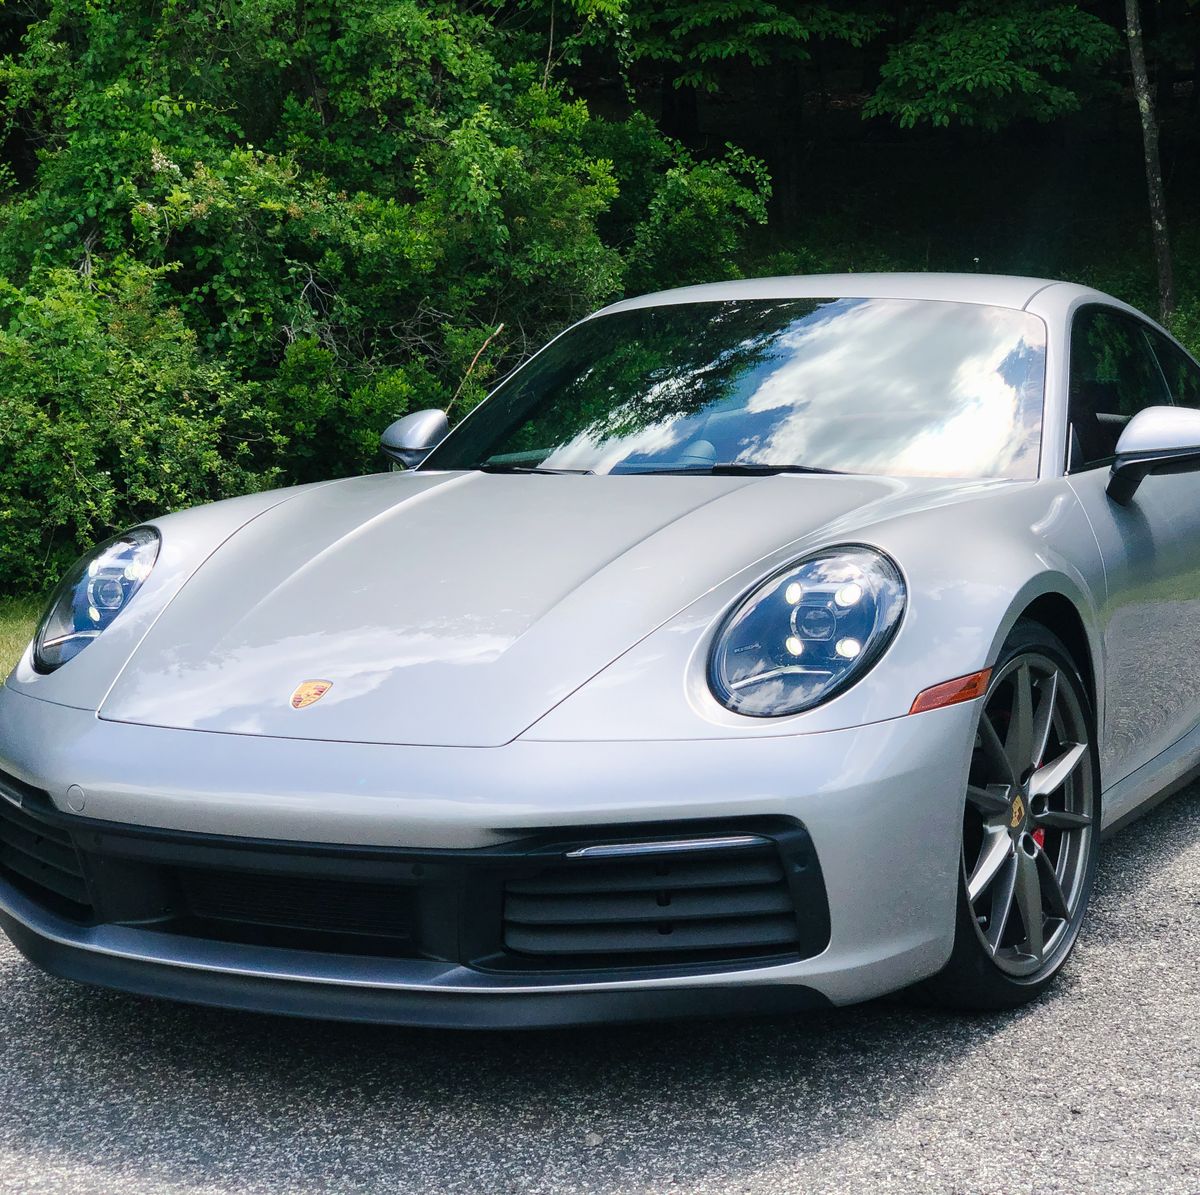 The 2020 Porsche 911 Is Slower, But Better, With a Stick Shift